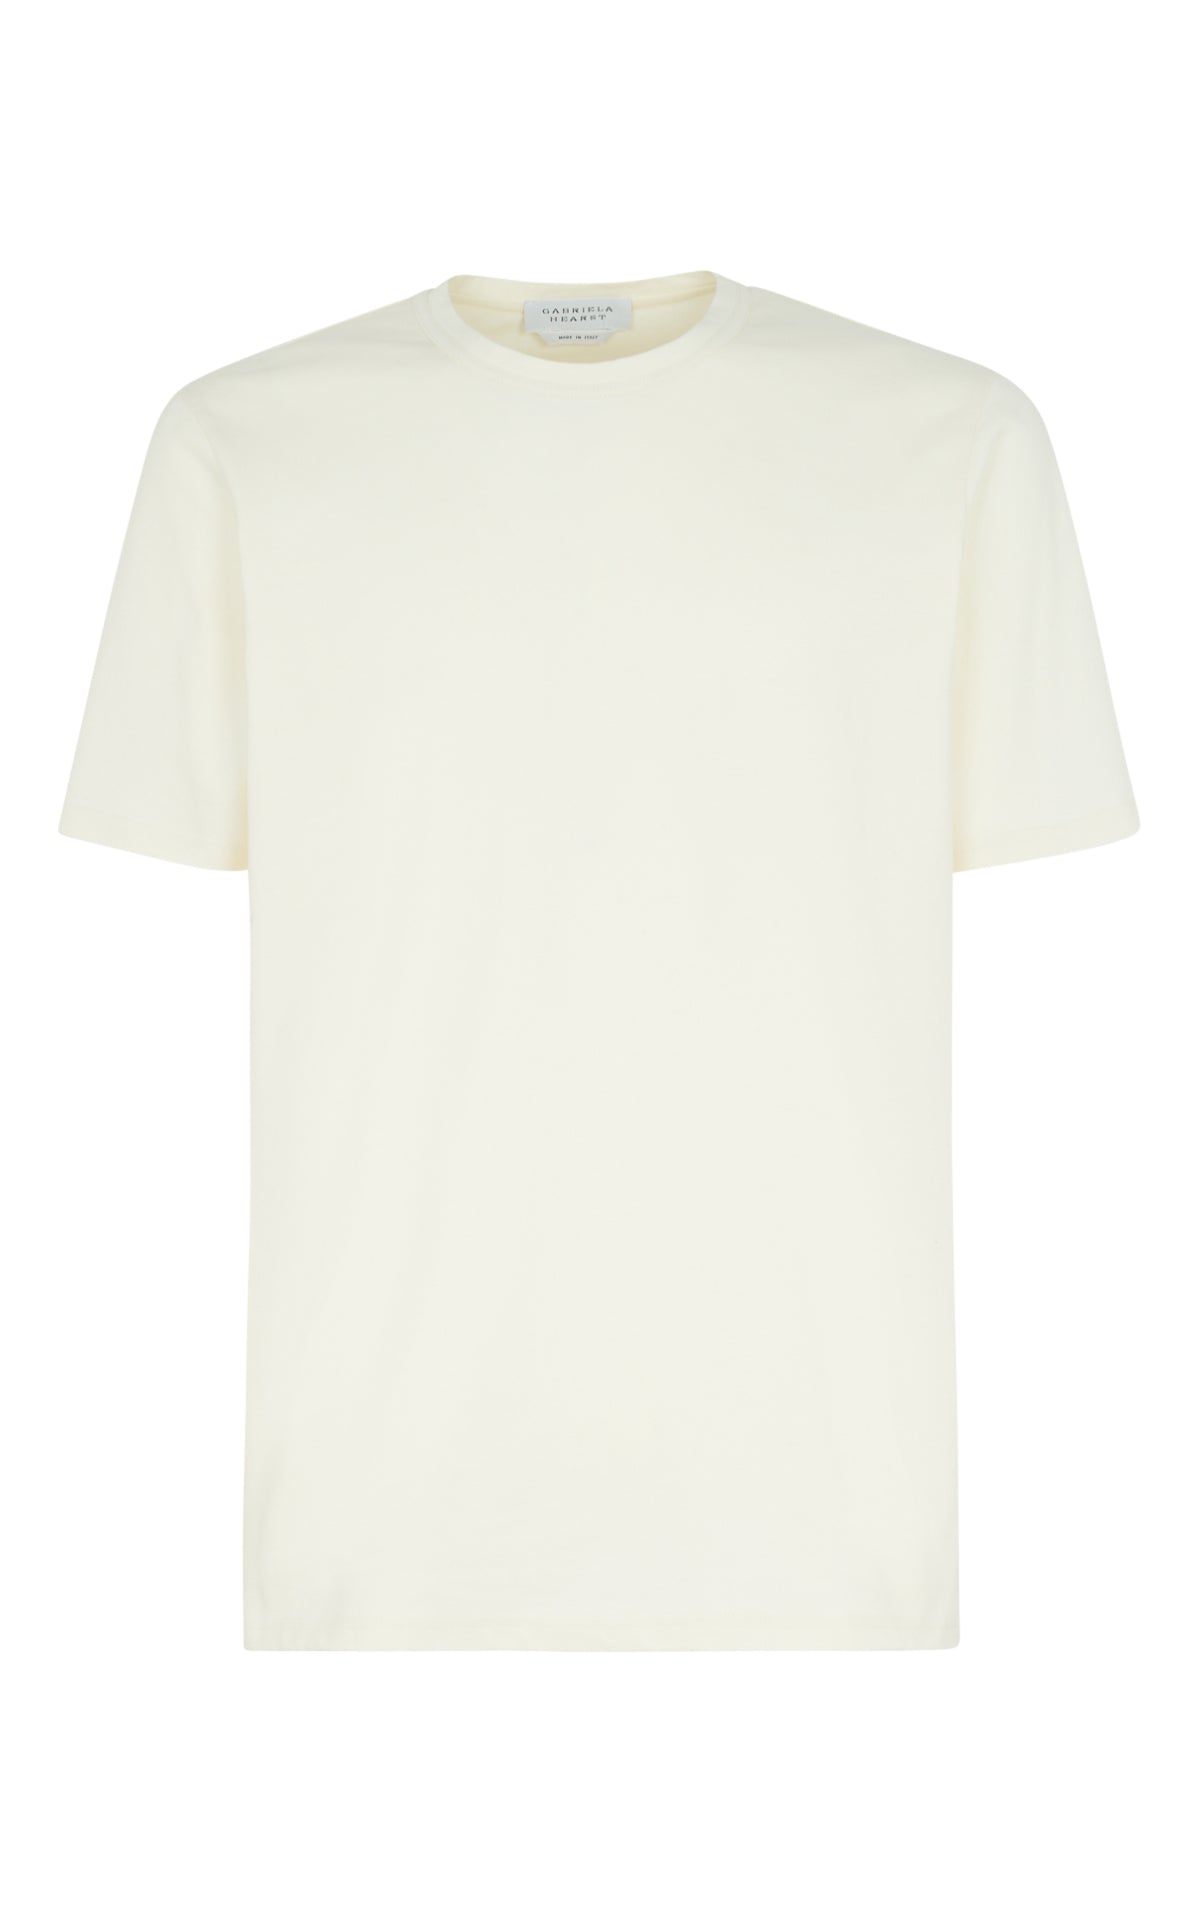 Bandeira T-Shirt in Ivory Upcycled Cotton